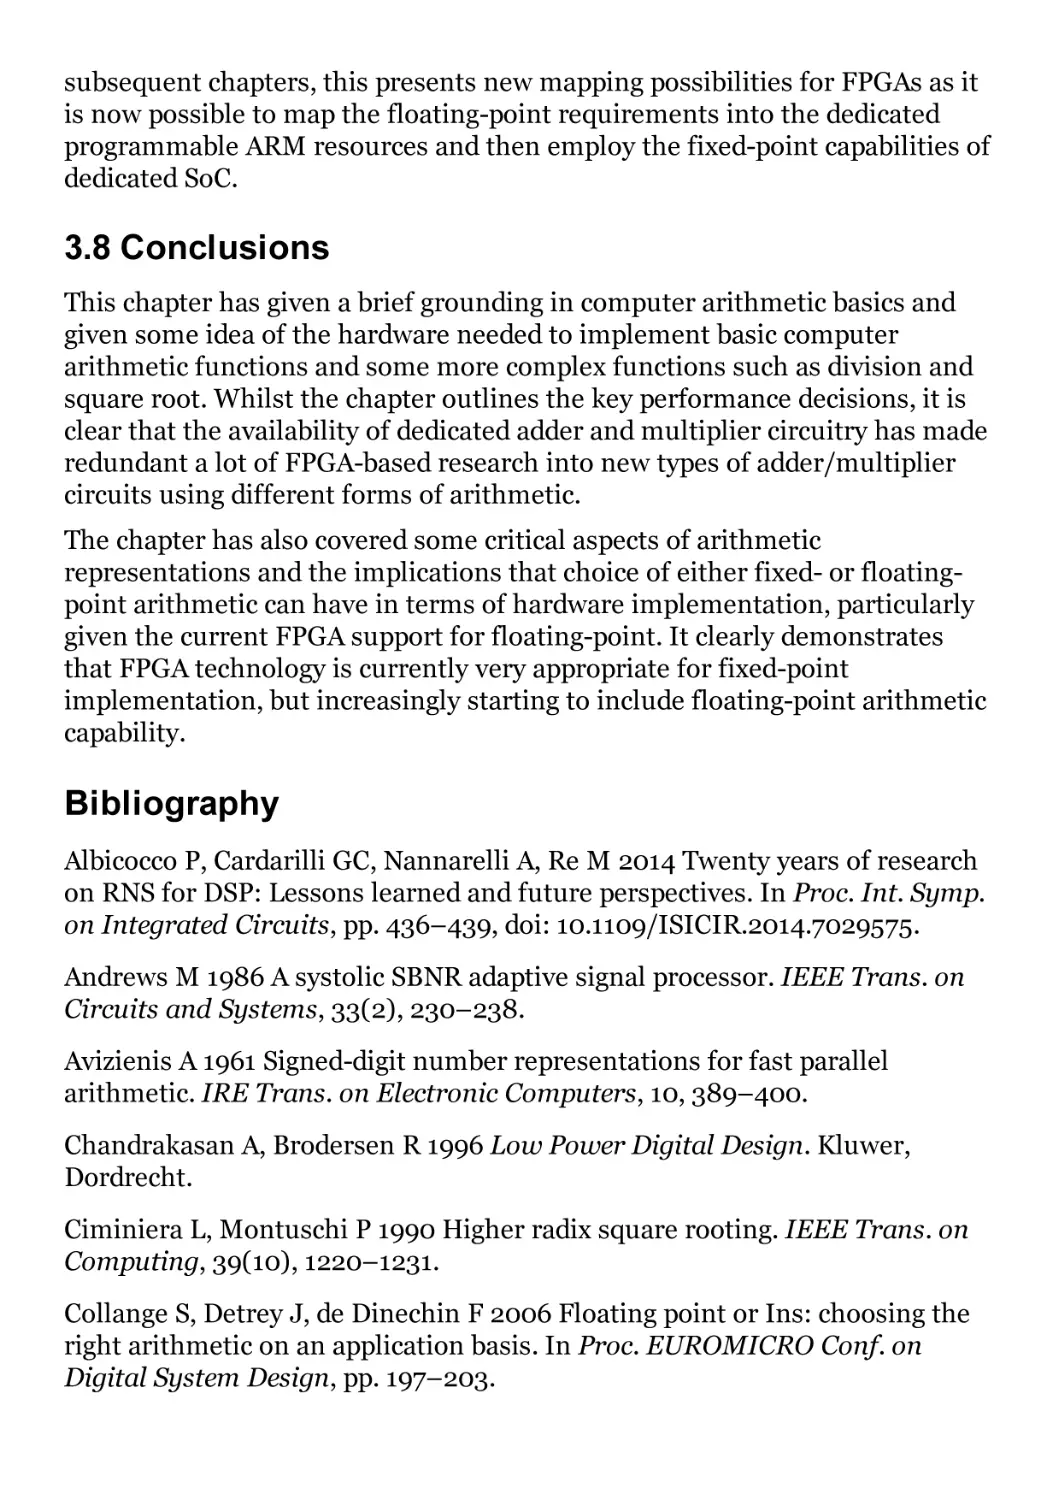 3.8 Conclusions
Bibliography